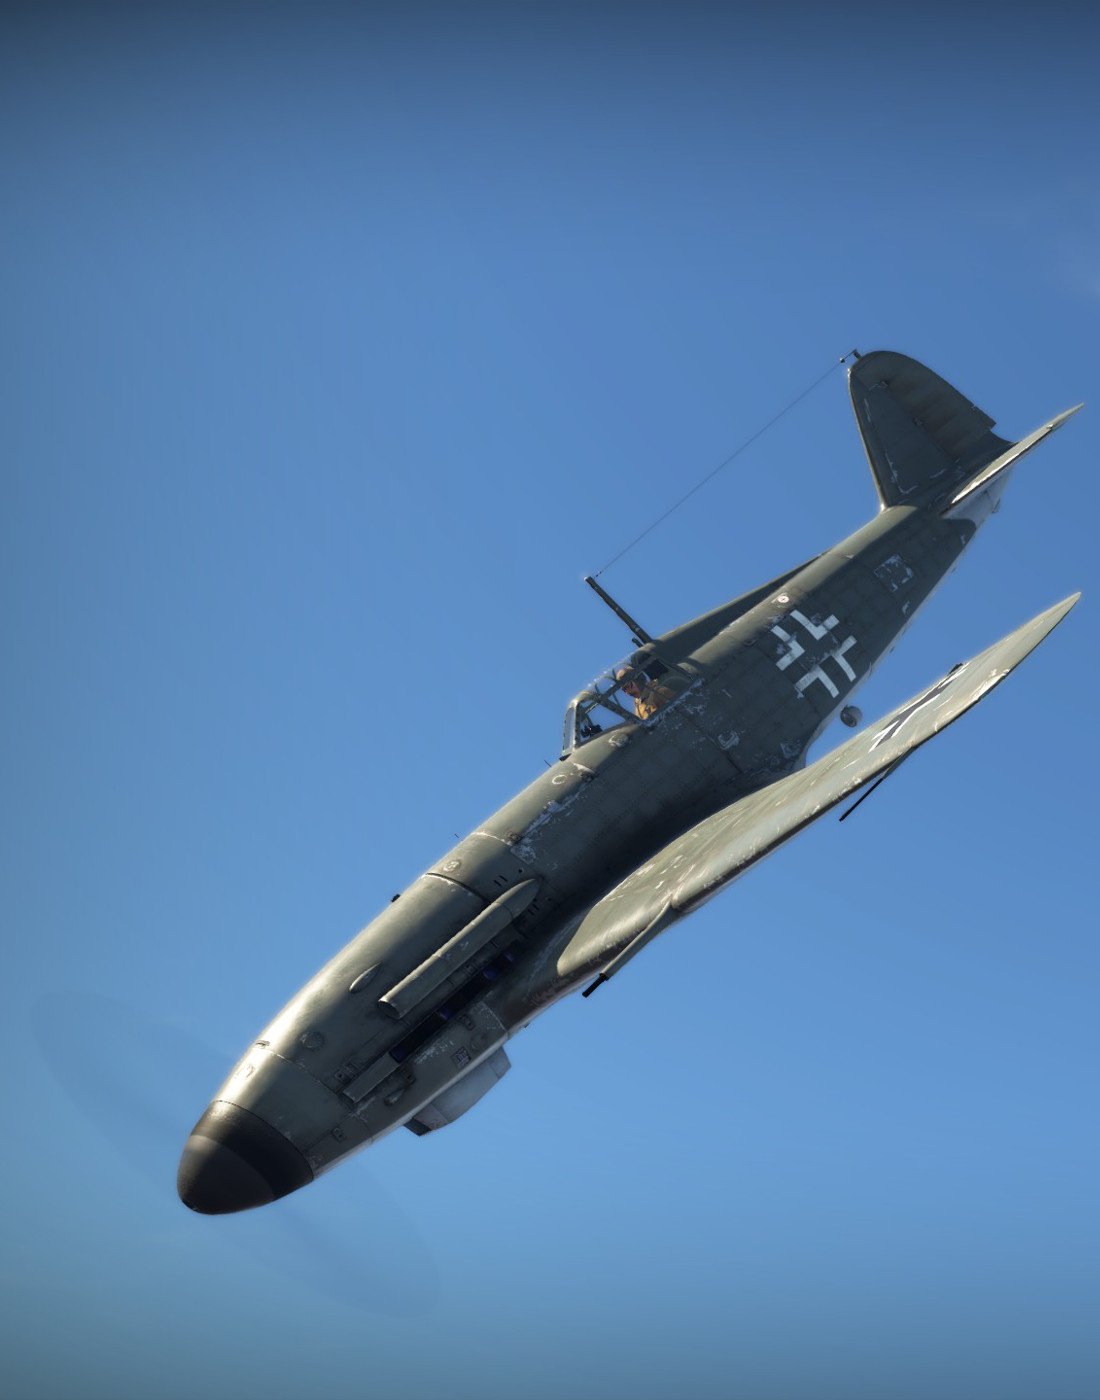 War Thunder on Twitter: "@Mark_G4M3R Yes, you can use your PS4 account on PC. However not the account on PS4." / Twitter